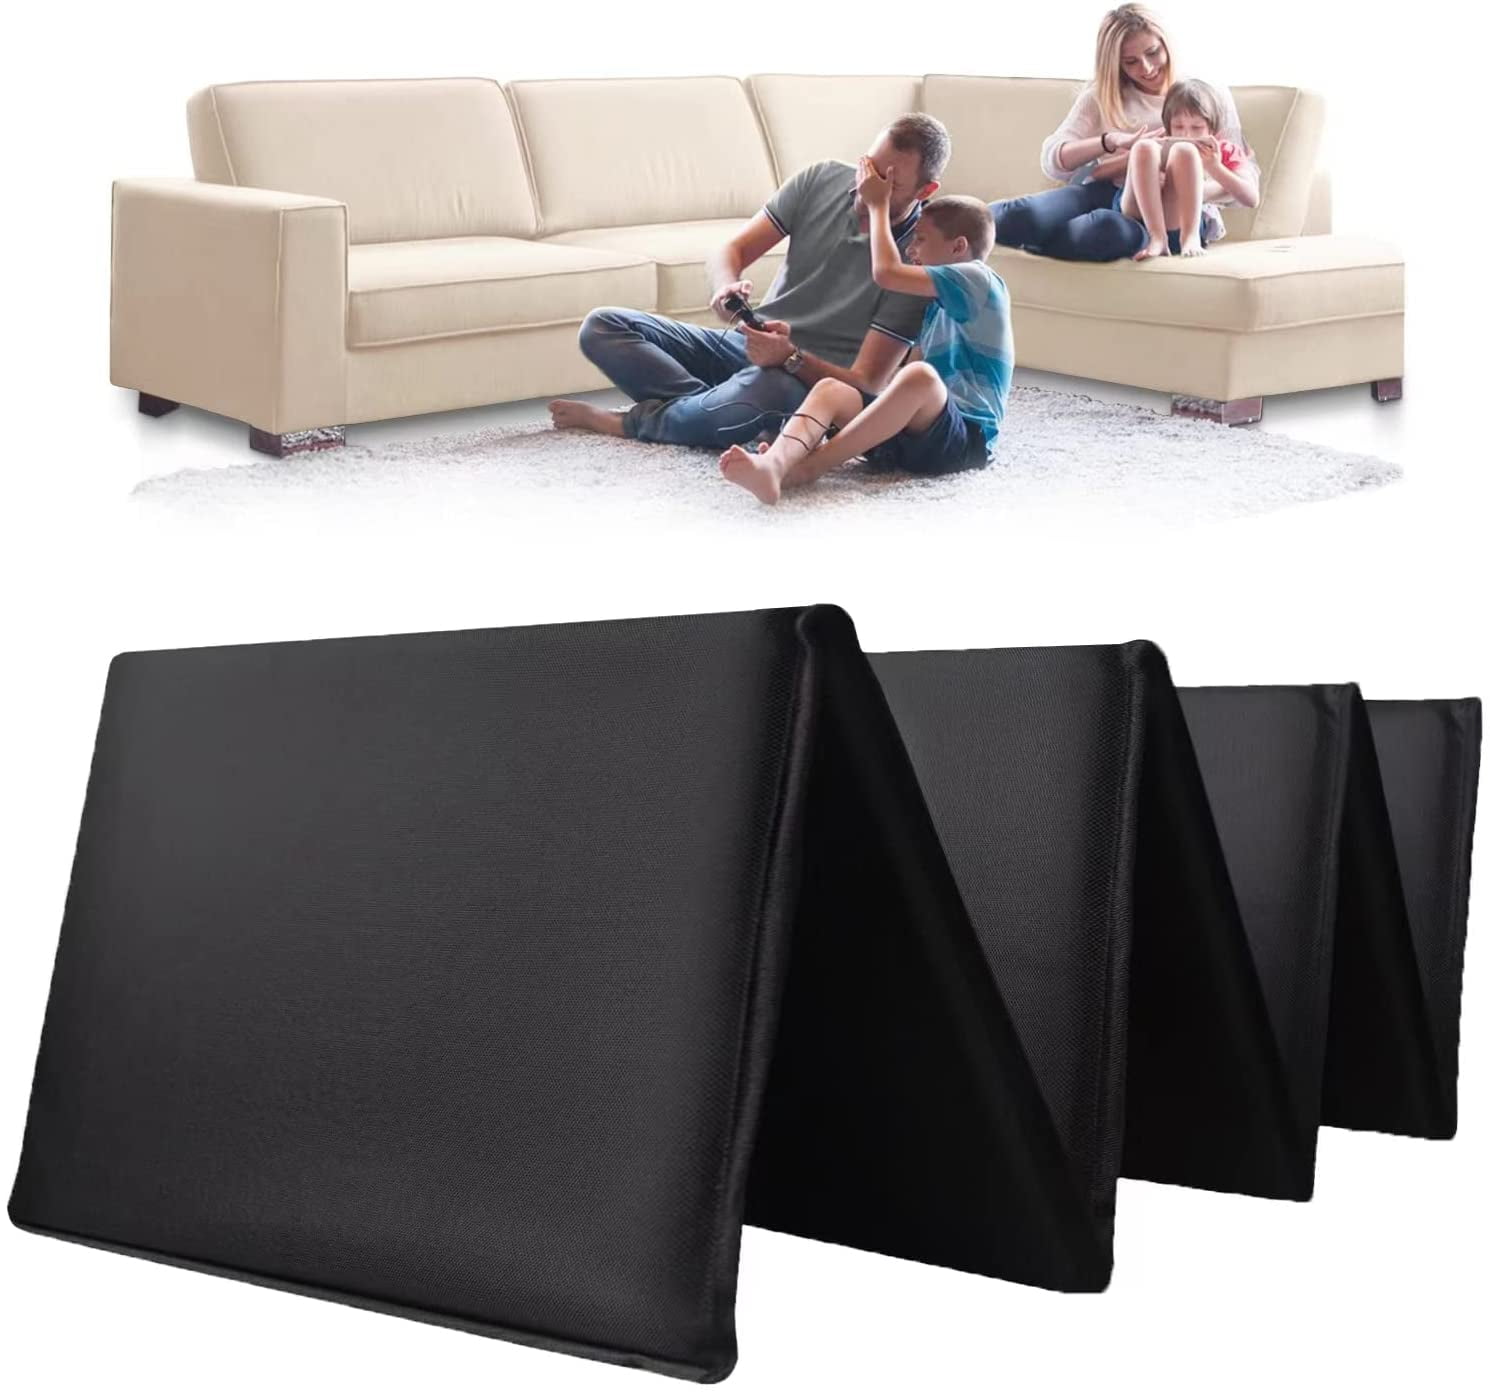 Details about   Sagging Furniture Cushion Support Insert Save Firm Restore Sofa Seat Extra Thick 